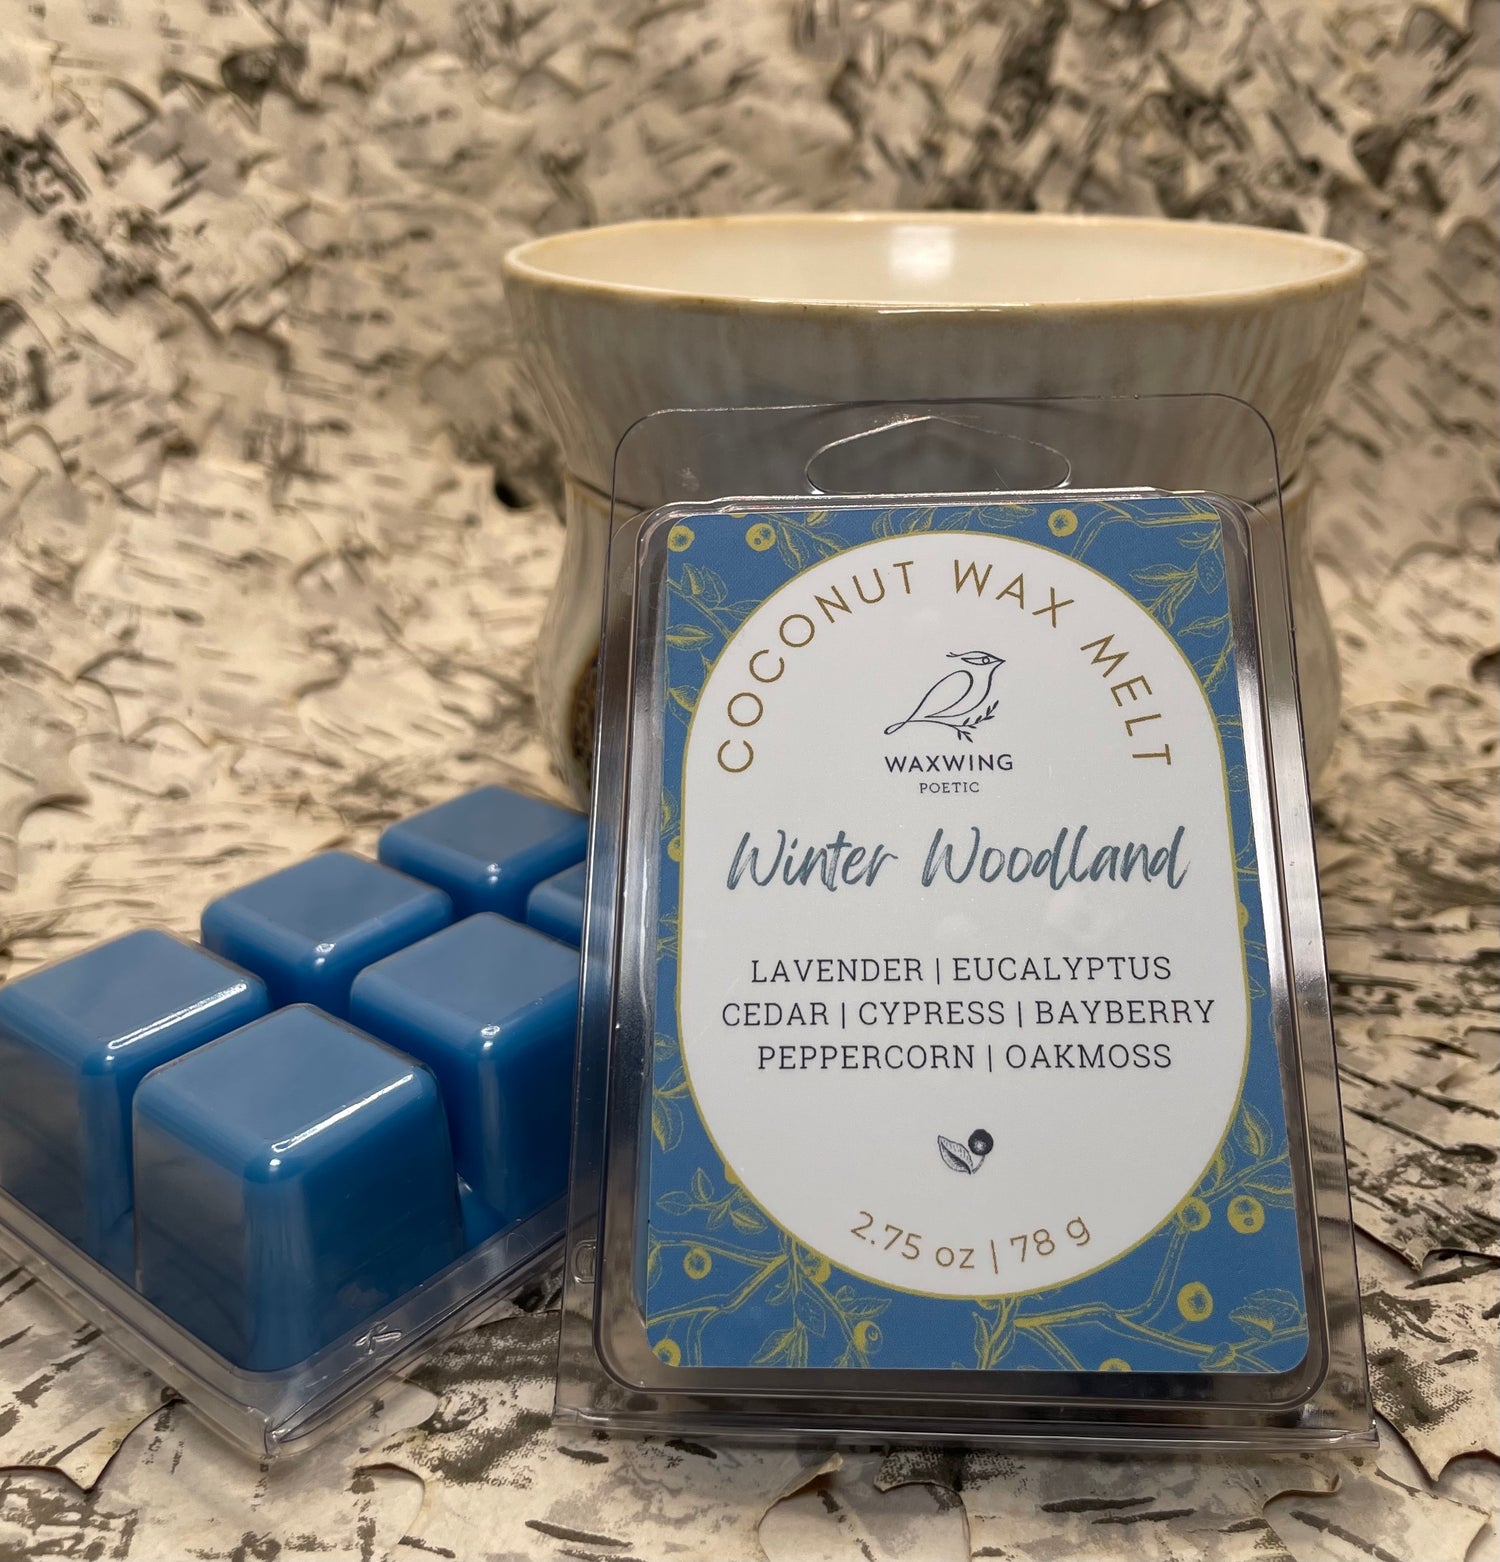 Shop for Wax Melts